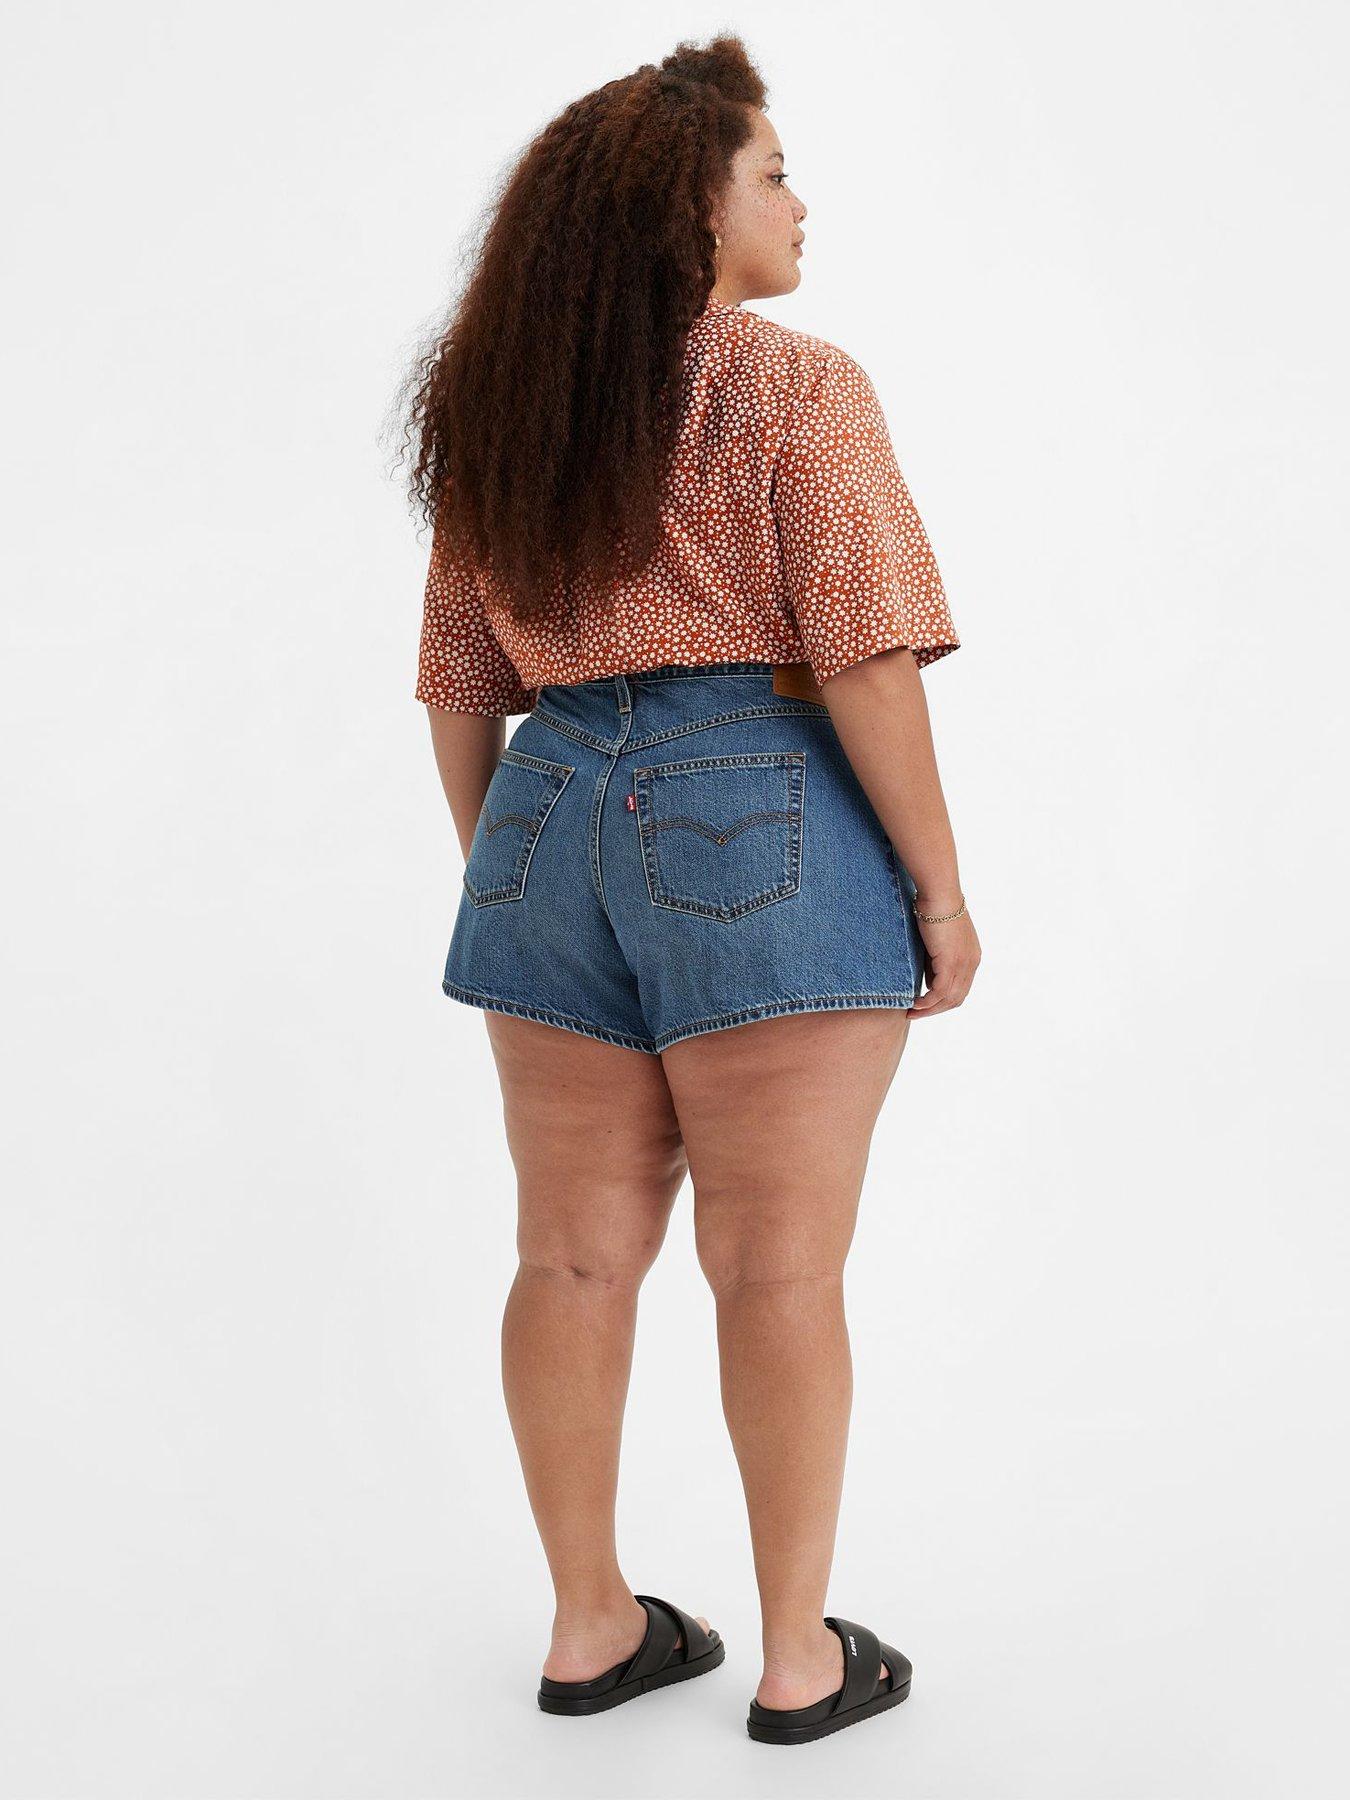 Levi's Plus 80's Mom Denim Shorts, You Sure Can, 18